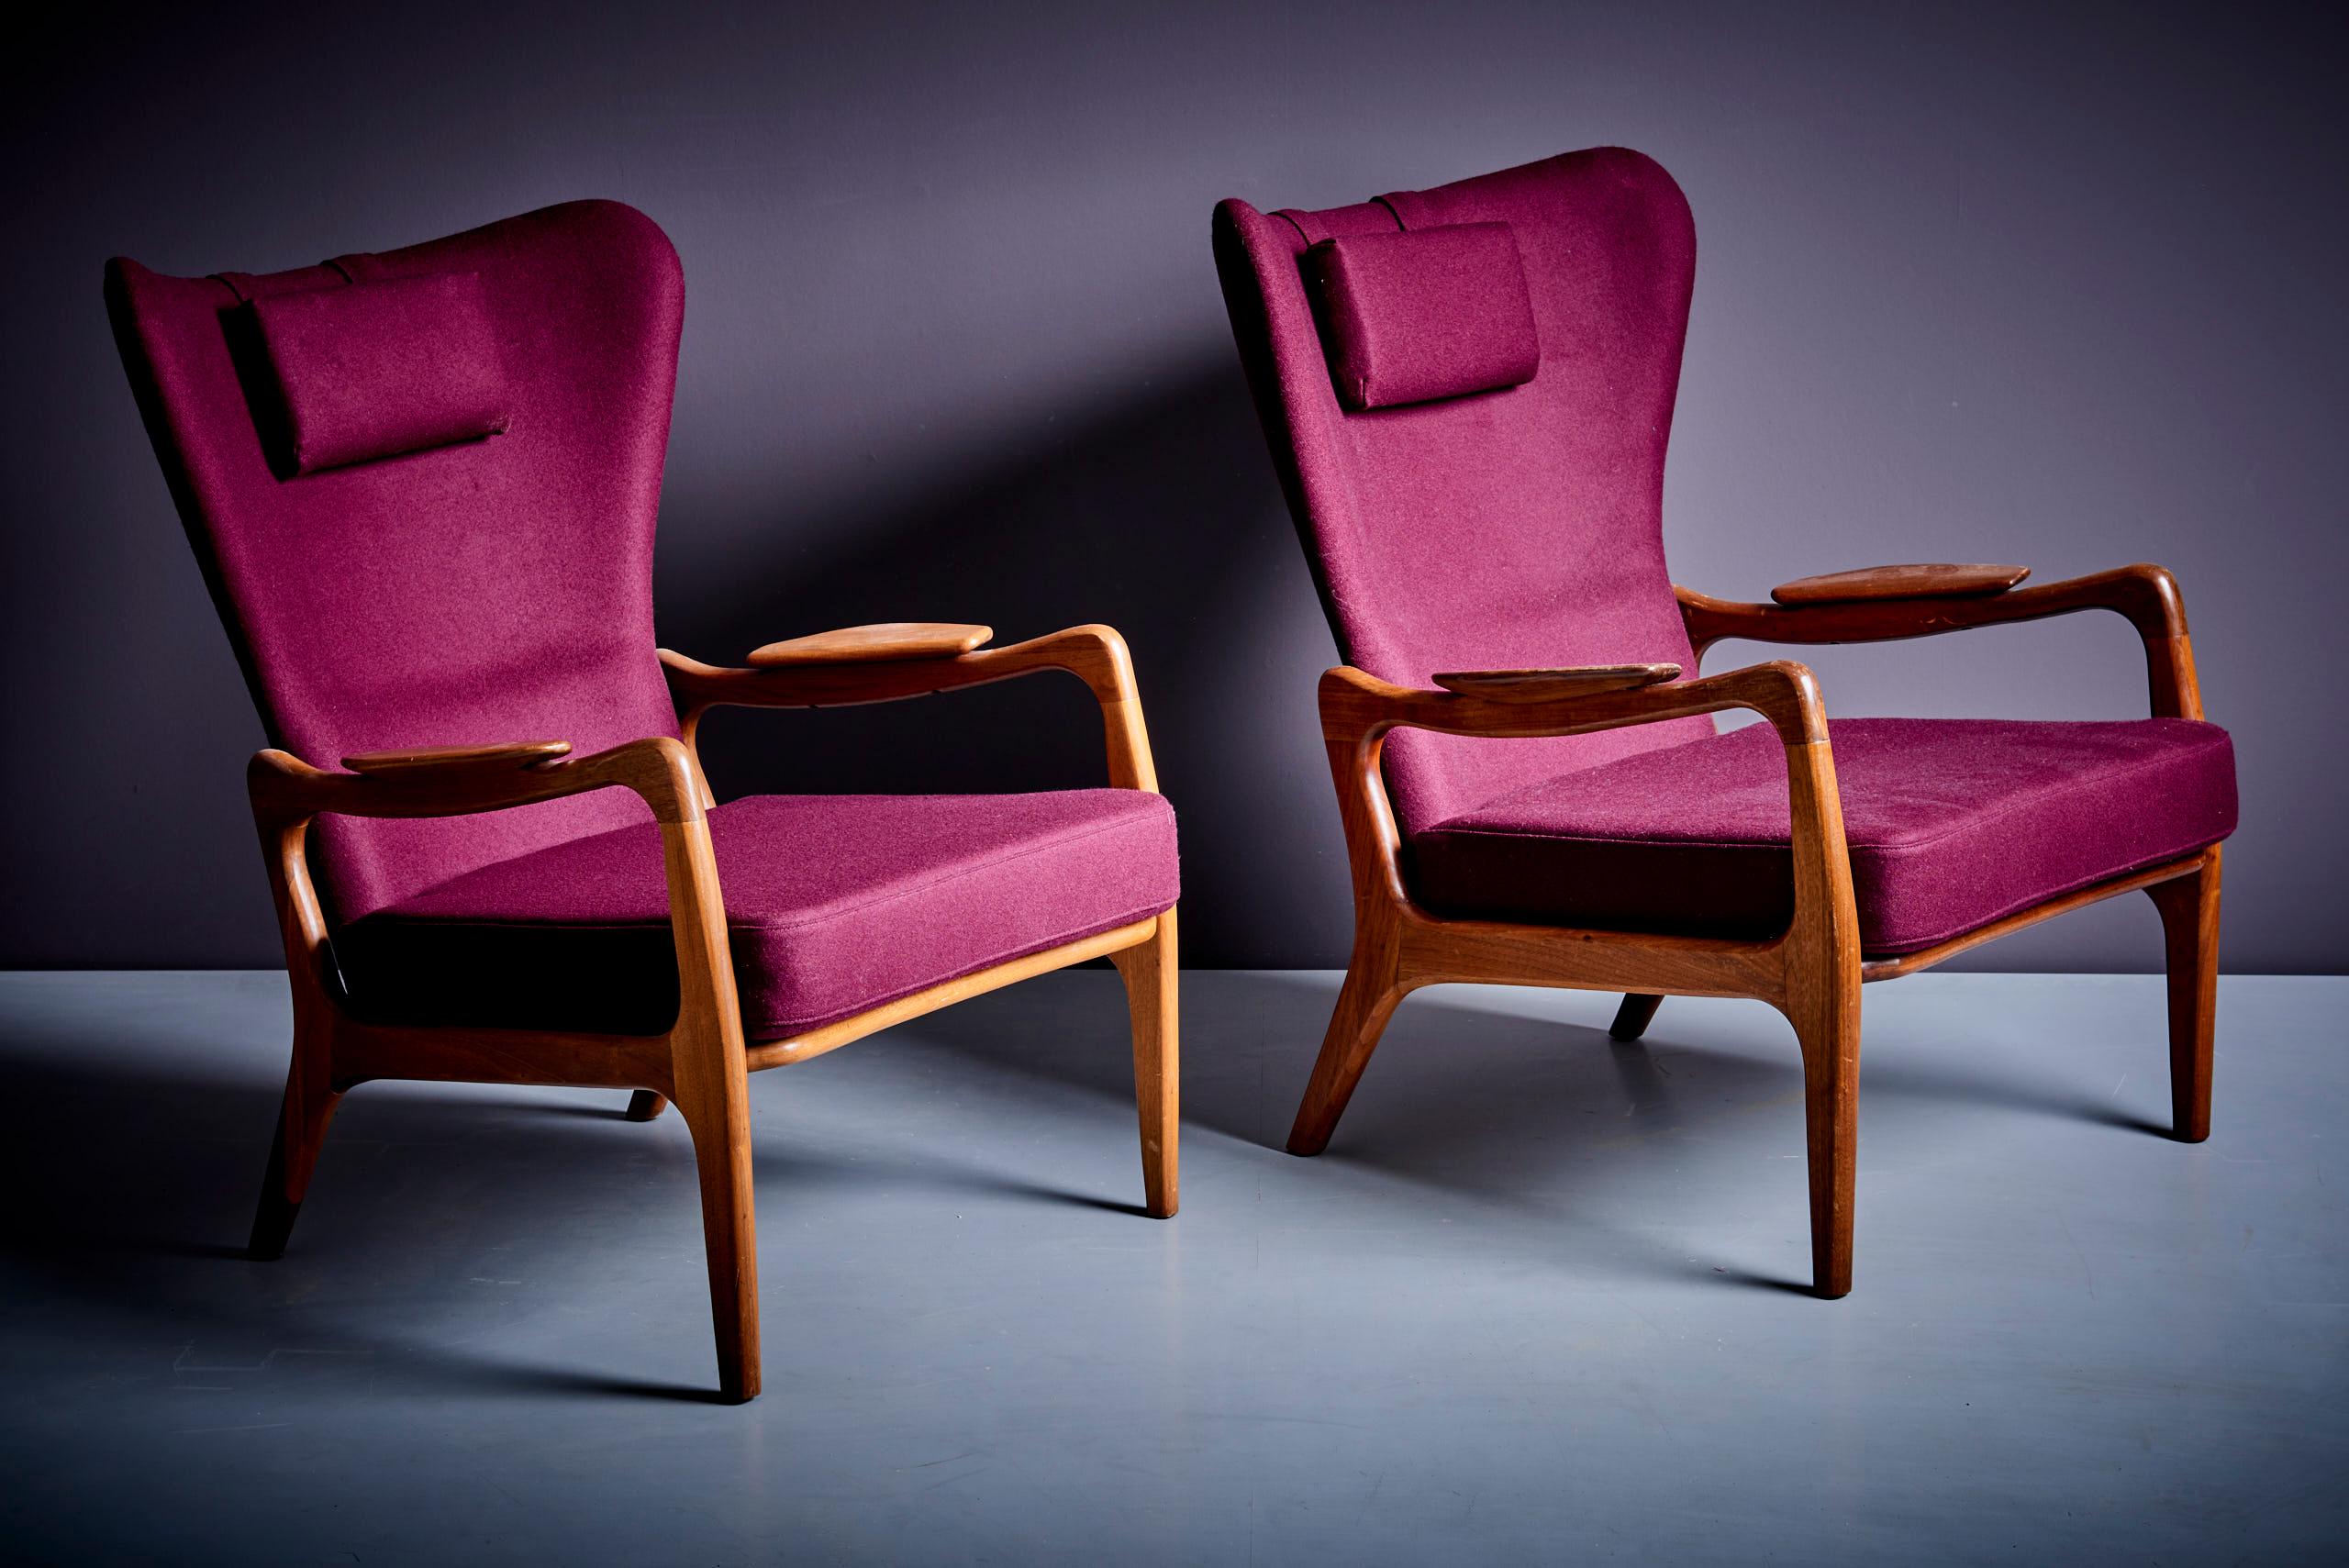 Newly Restored Pair of Plum Adrian Pearsall High Back Wing Lounge Chair 1950s For Sale 5